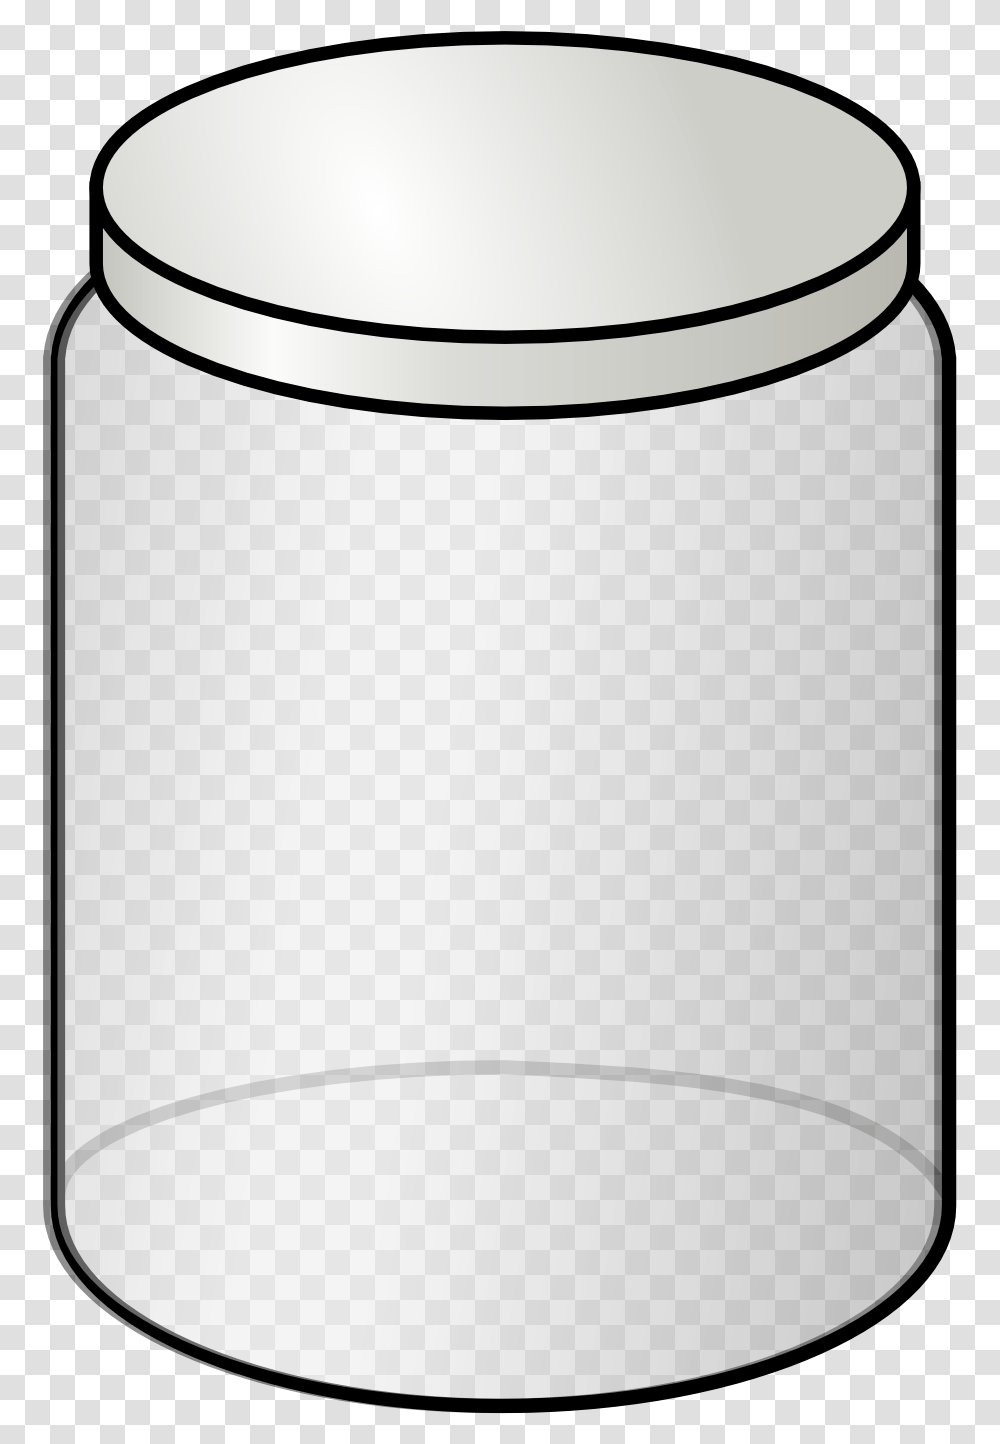 Object Survival Island Bodies, Lamp, Jar, Tin, Can Transparent Png